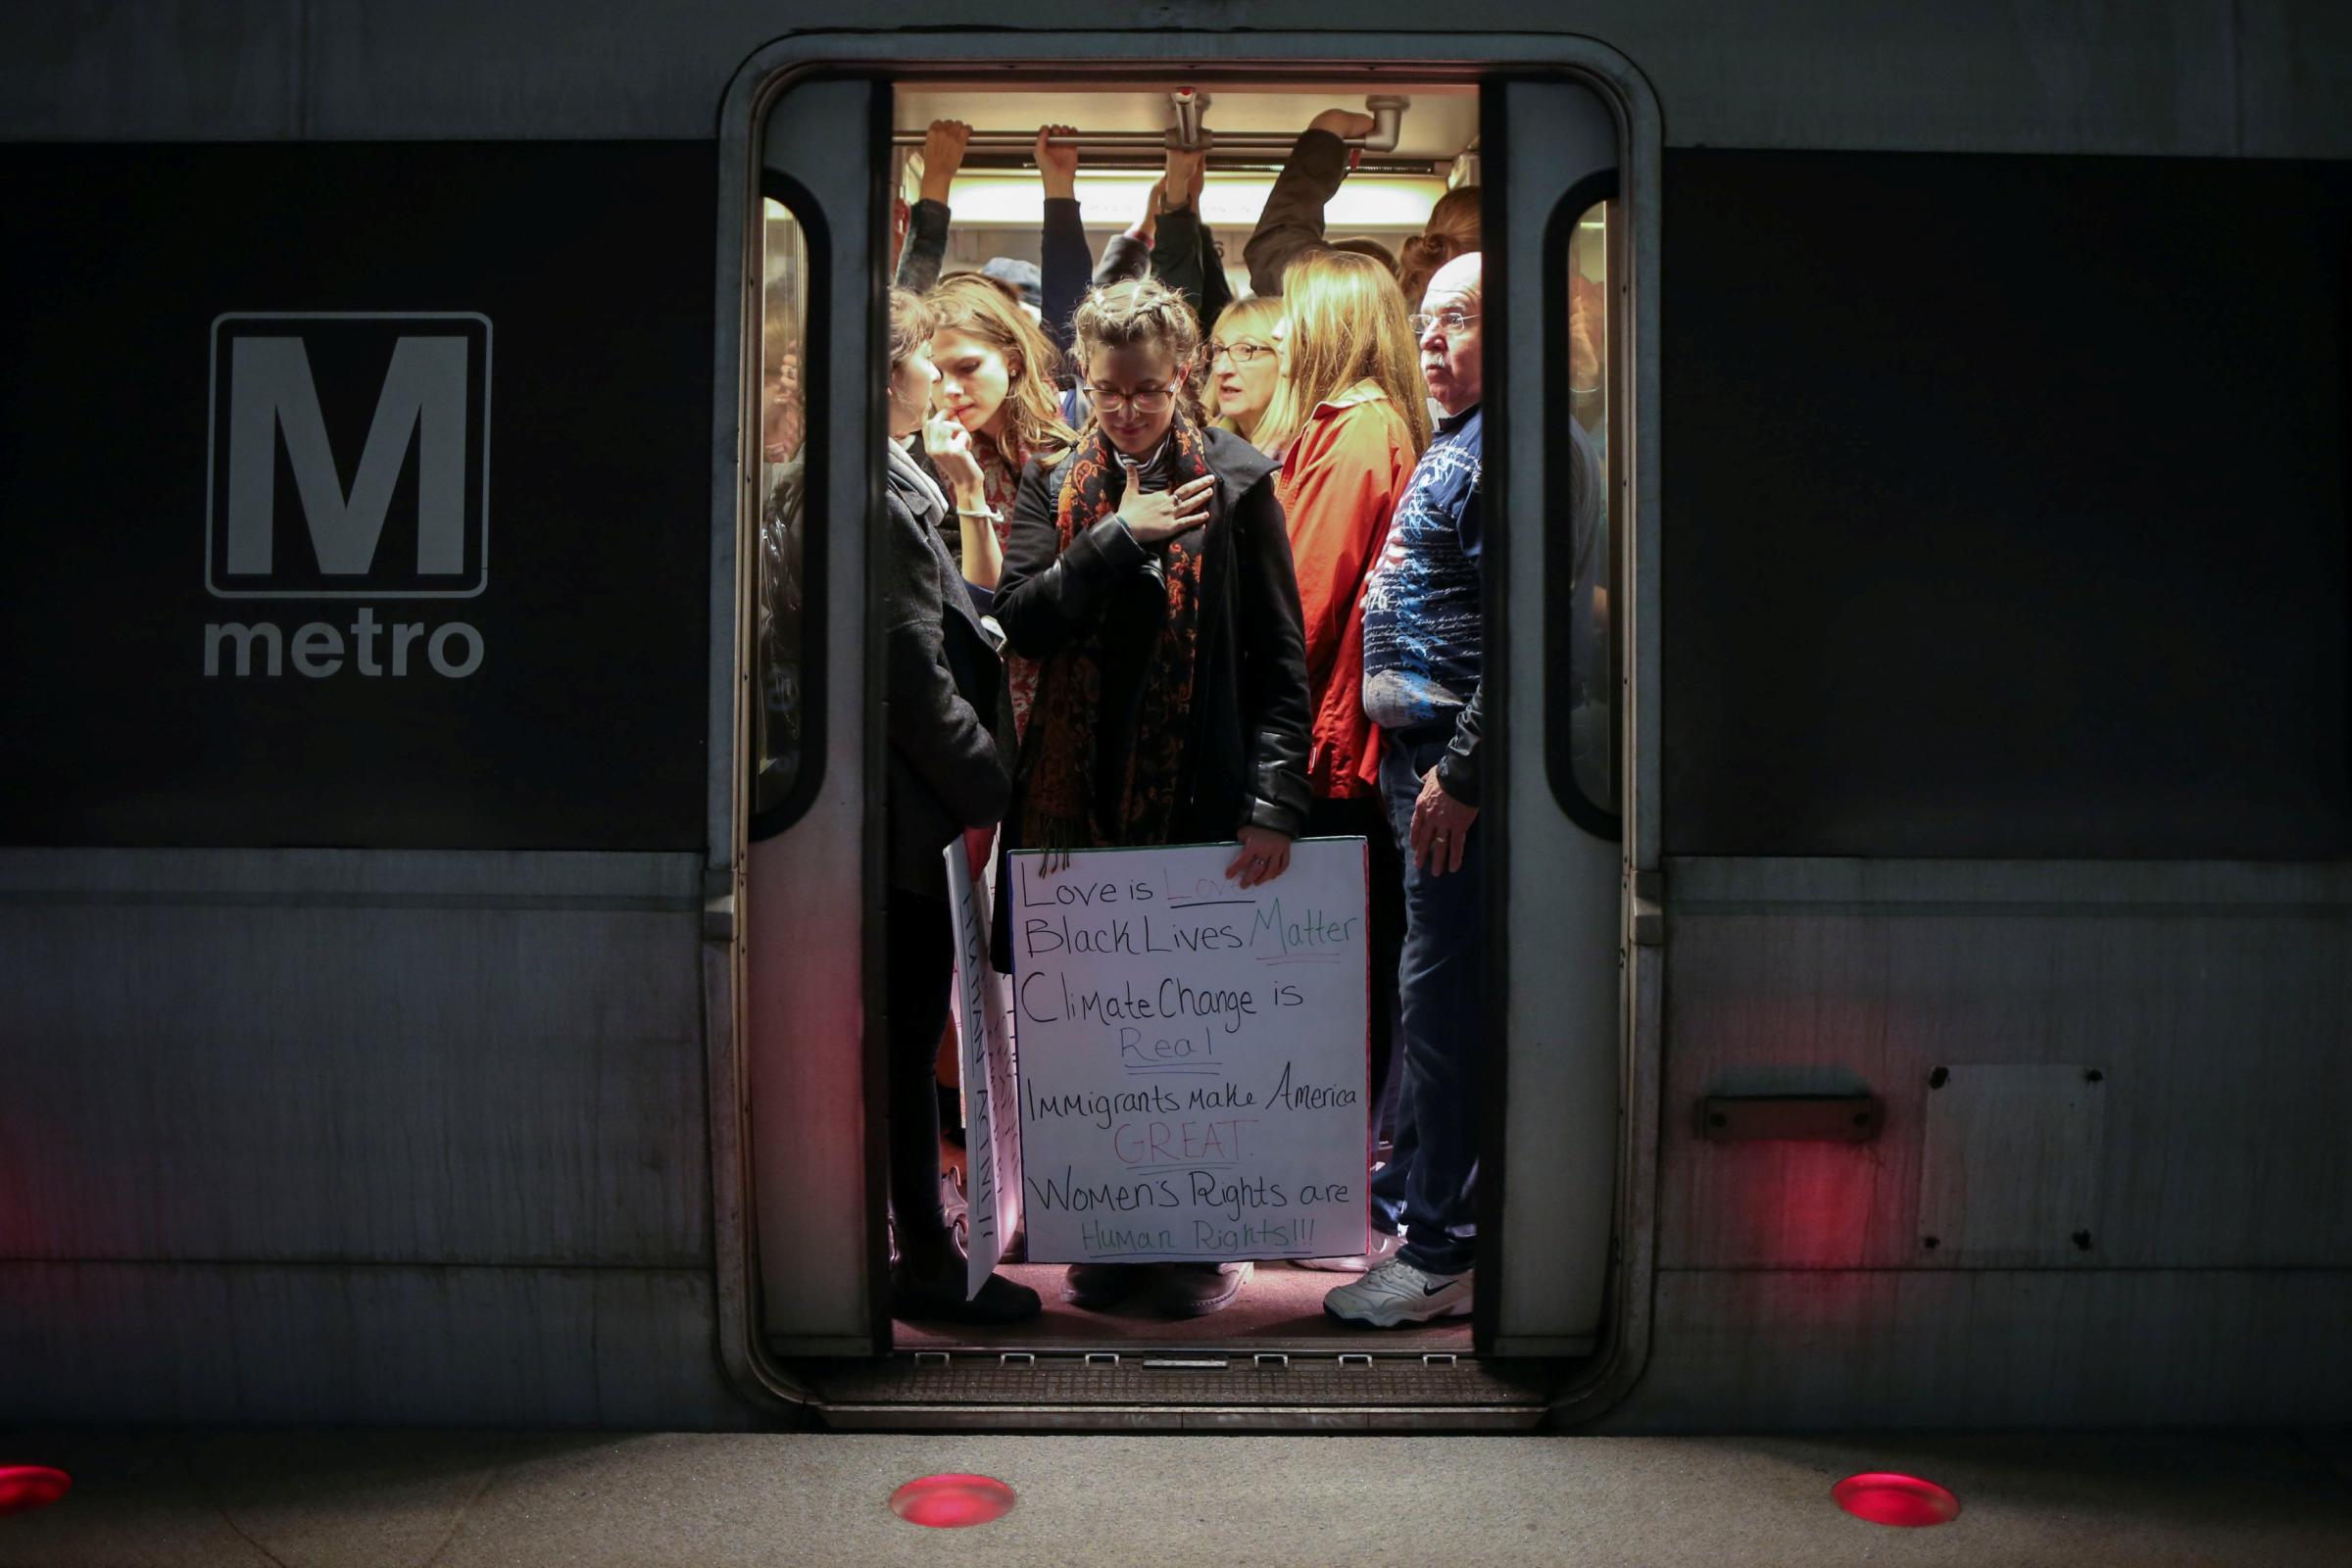 A woman activist holds placard on Metrorail on way to Women's March in Washington, D.C.